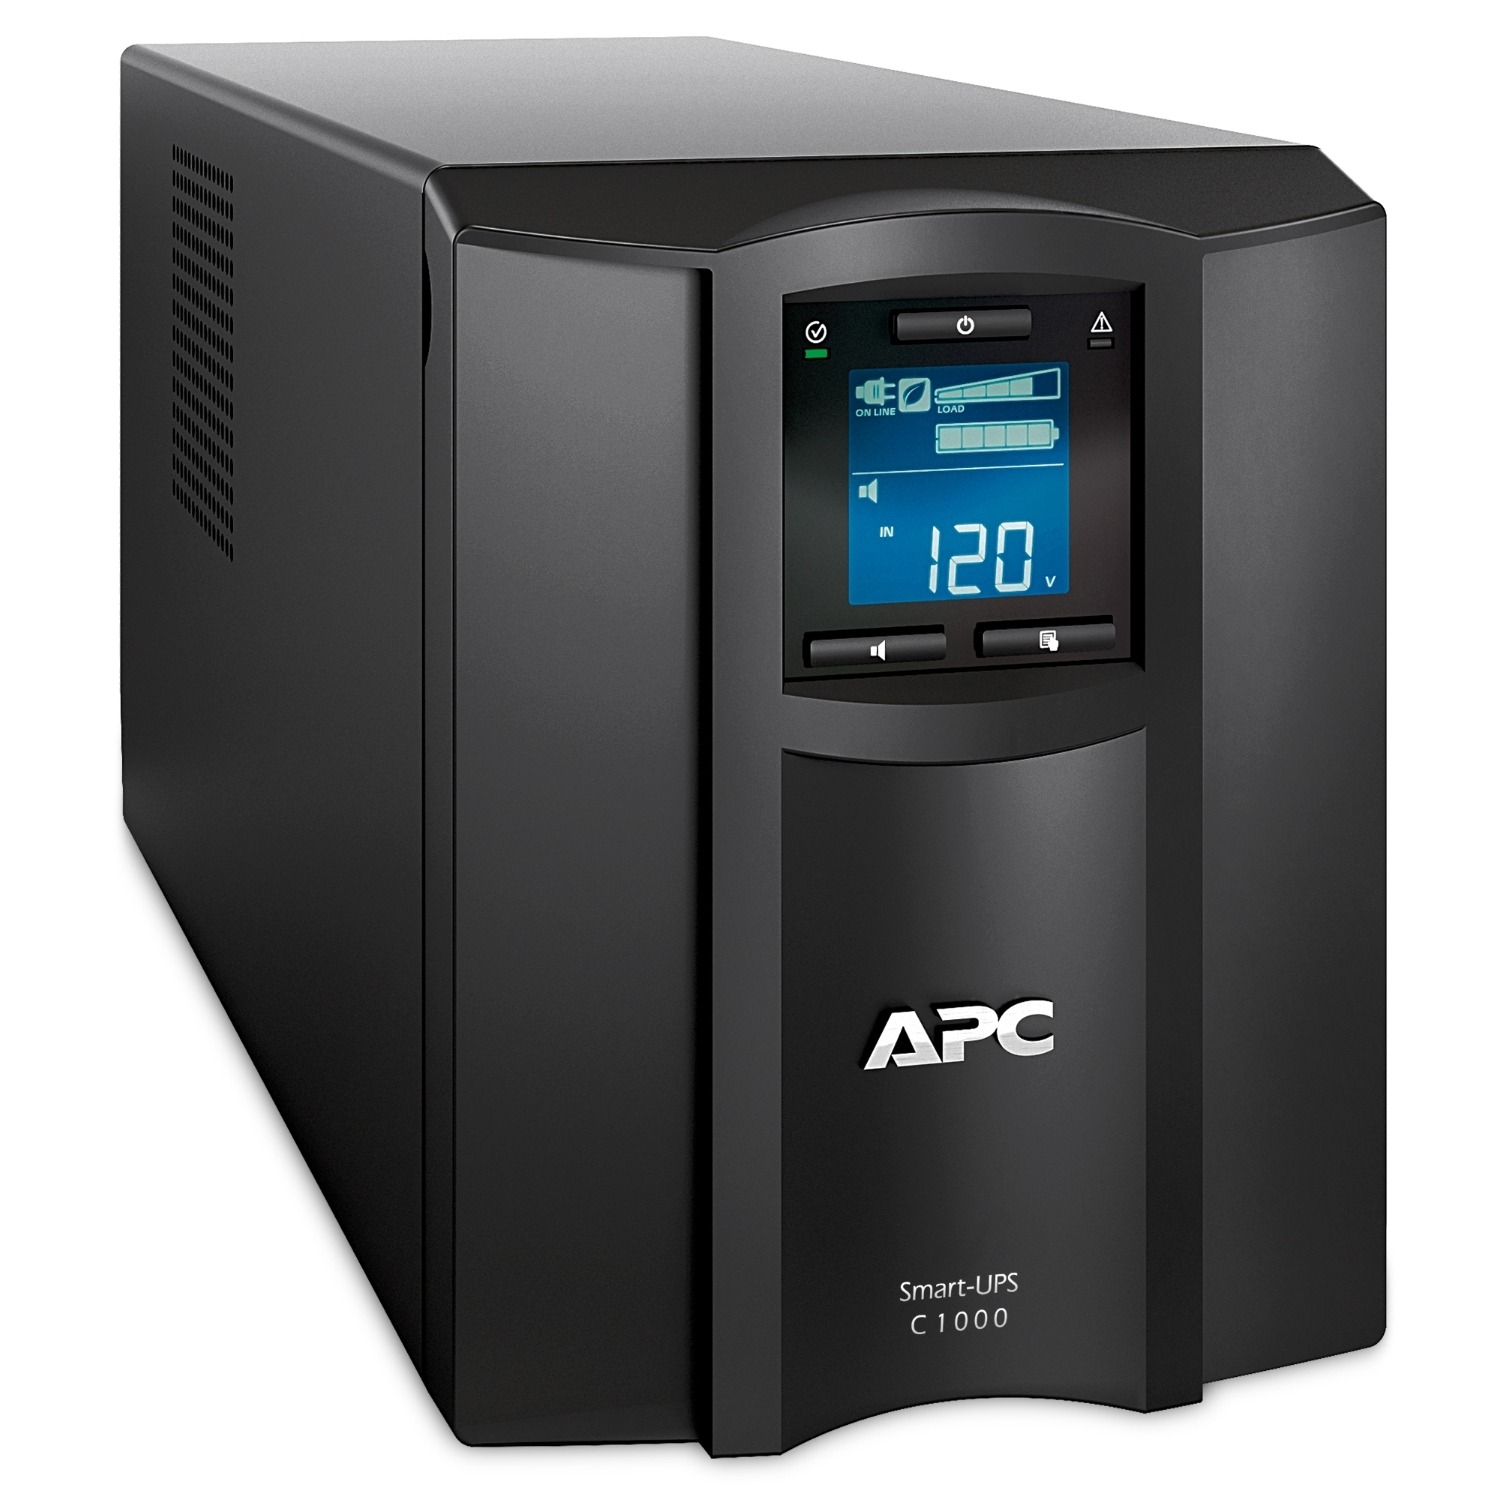 APC Smart-UPS C, Line Interactive, 1000VA, Tower, 230V, 8x IEC C13 outlets, SmartConnect port, USB and Serial communication, AVR, Graphic LCD